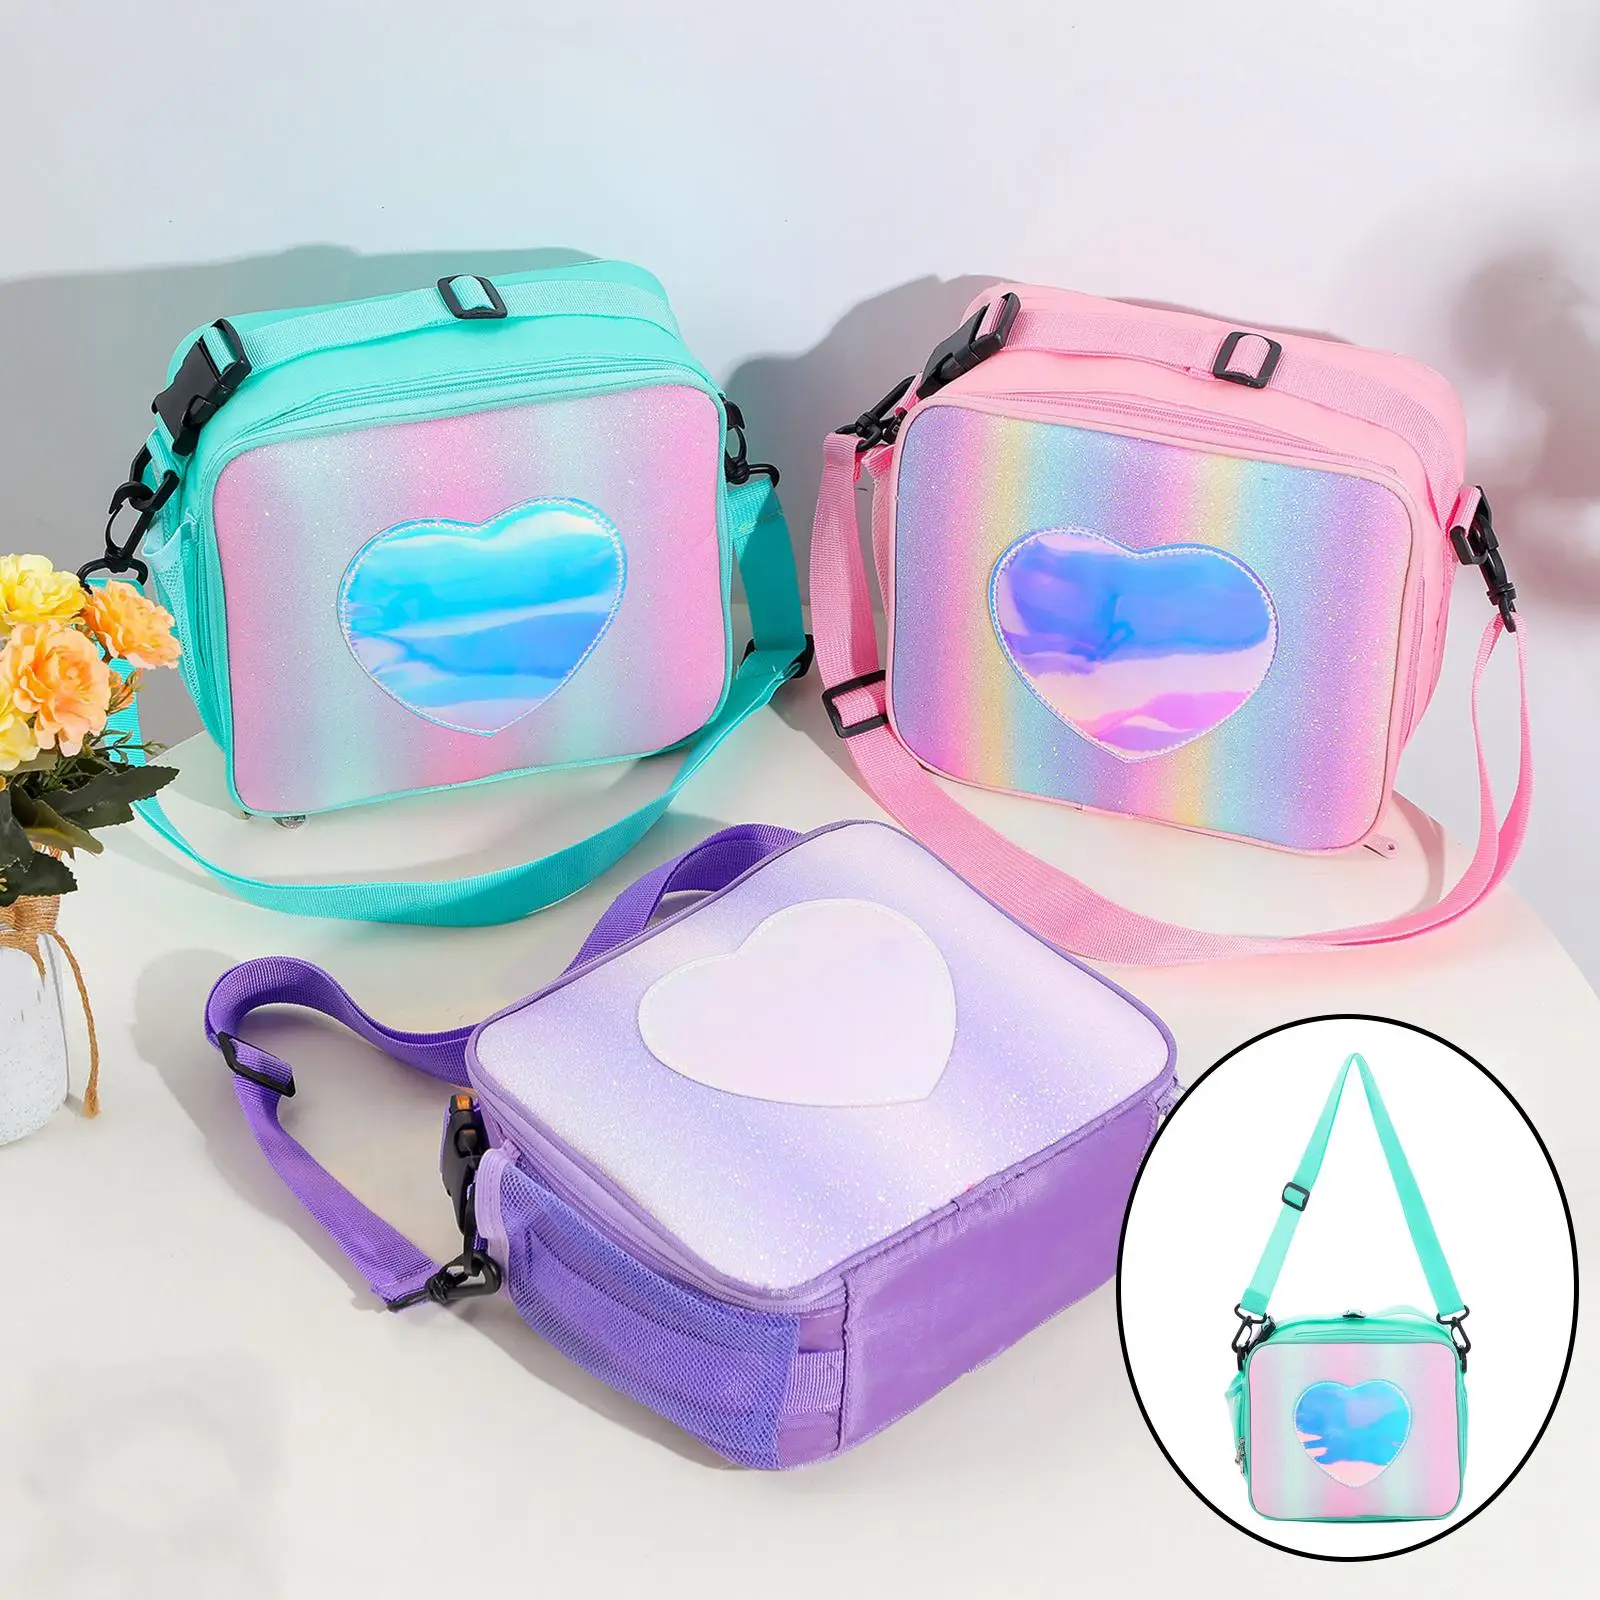  Storage Organizer Bag Insulated Thermal Cooler  Picnic Case Storage Bag for  Office